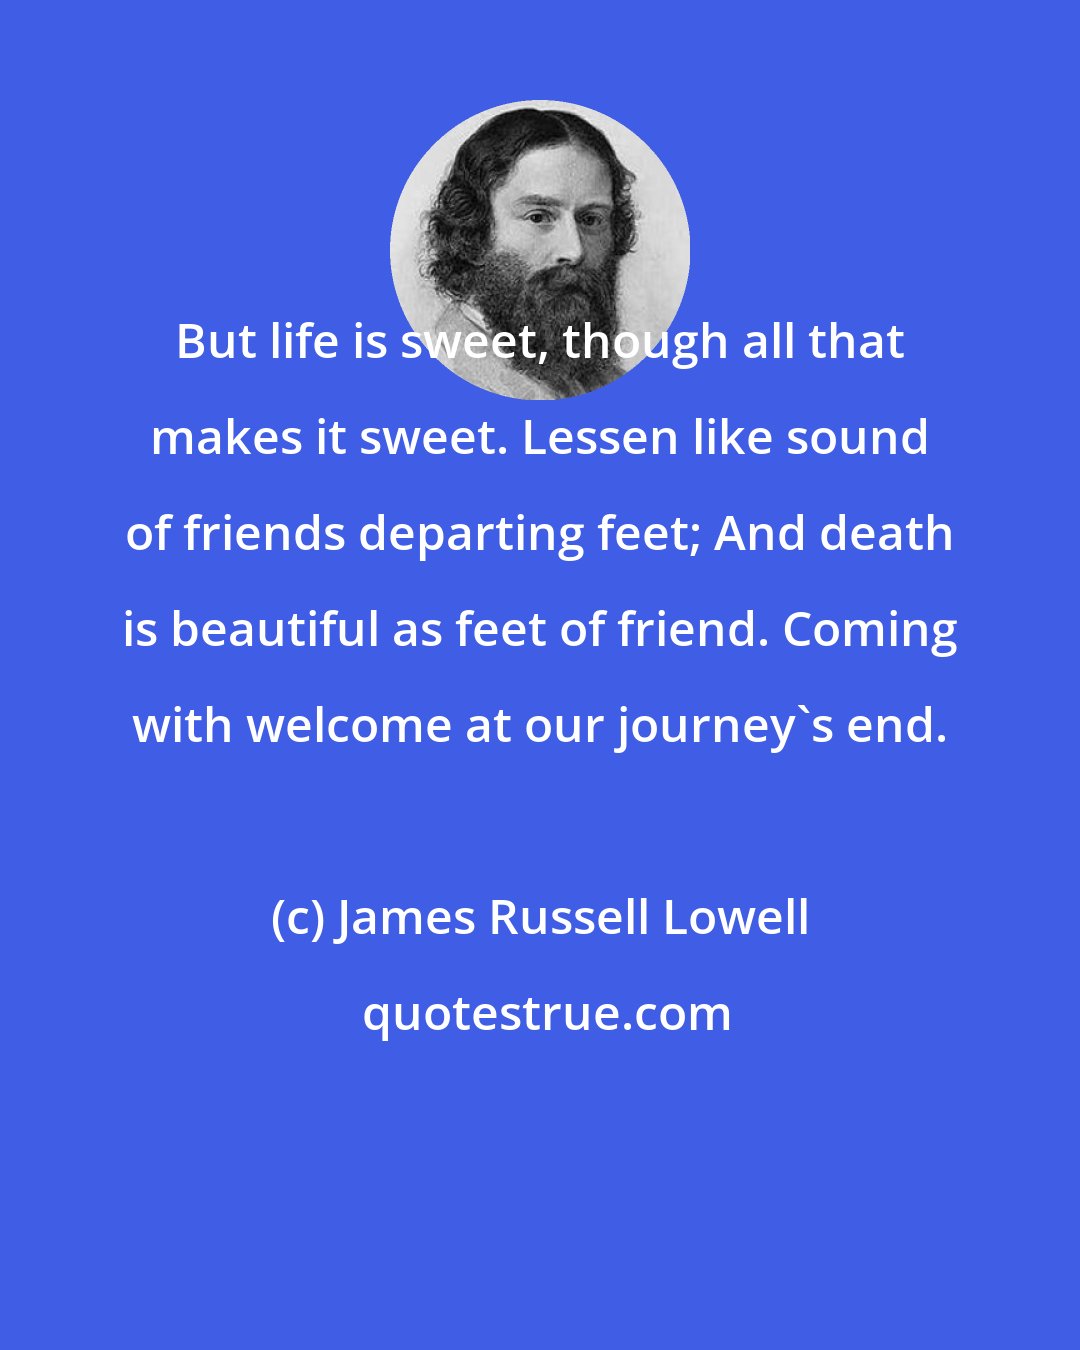 James Russell Lowell: But life is sweet, though all that makes it sweet. Lessen like sound of friends departing feet; And death is beautiful as feet of friend. Coming with welcome at our journey's end.